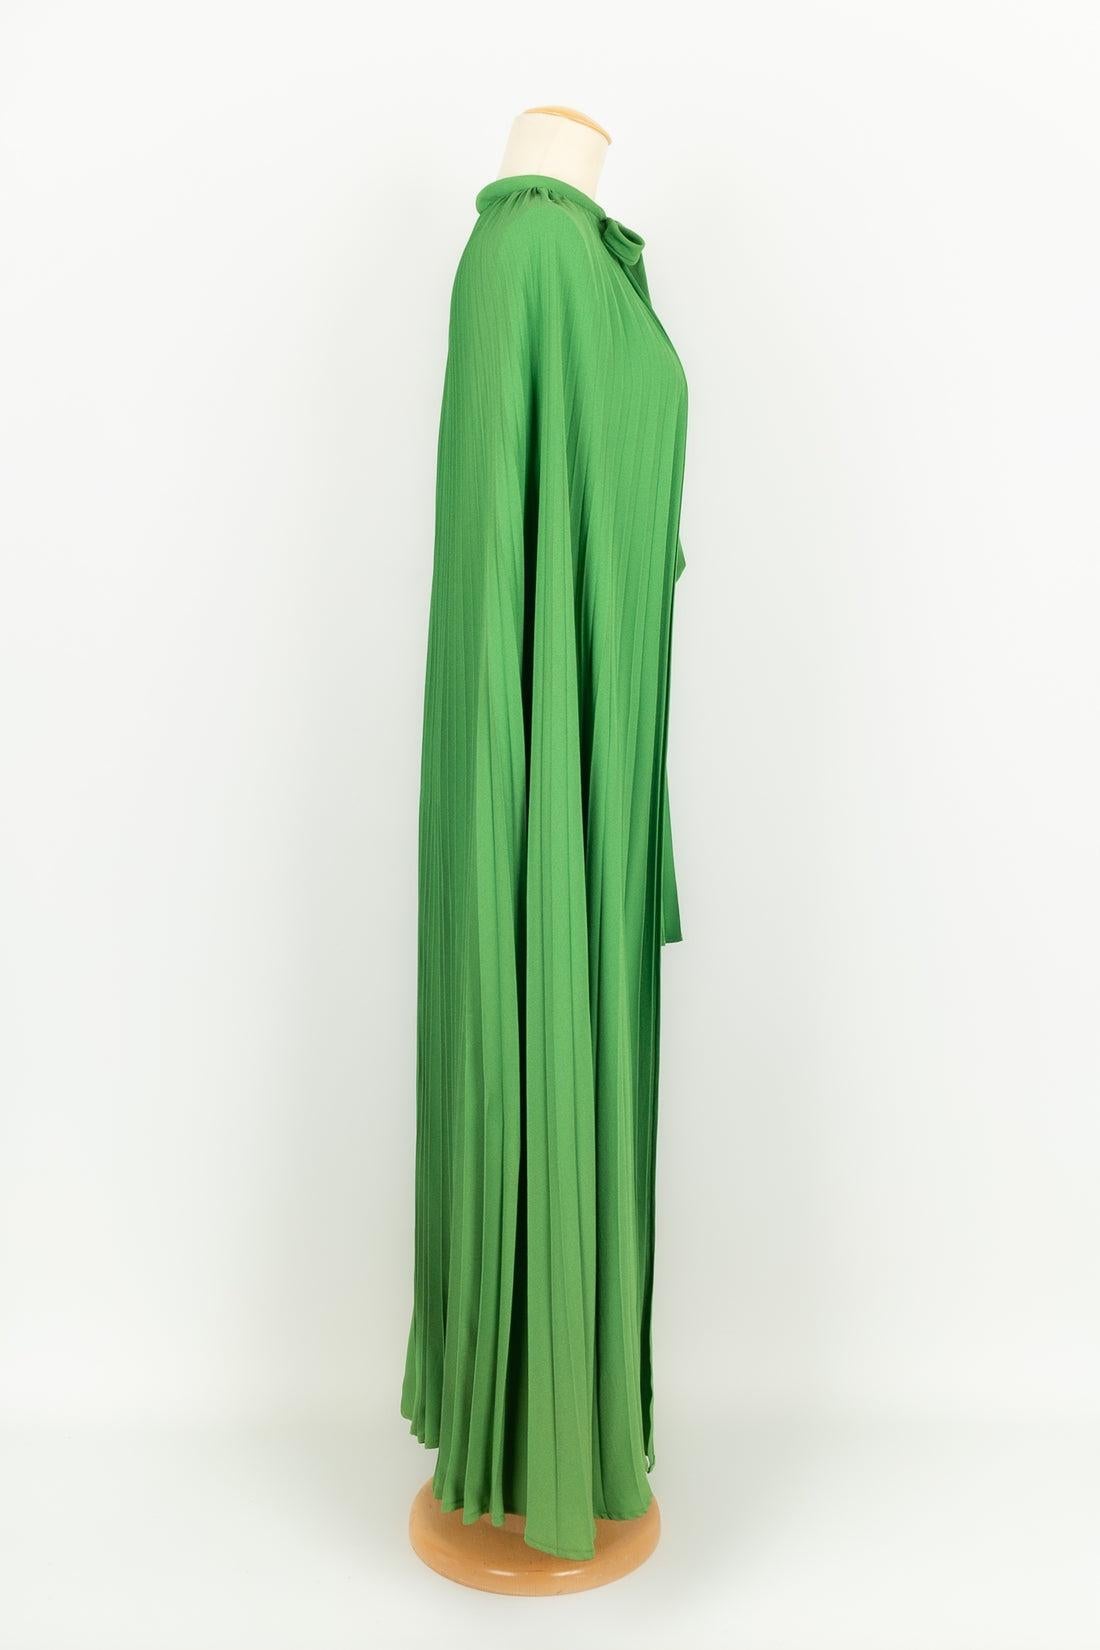 Azzaro - (Made in France) Short strapless dress in green pleated jersey with its cape. Label 90/75B for the chest. No size indicated, this set fits a 36FR. To note, the dress has been shortened.

Additional information:
Condition: Good